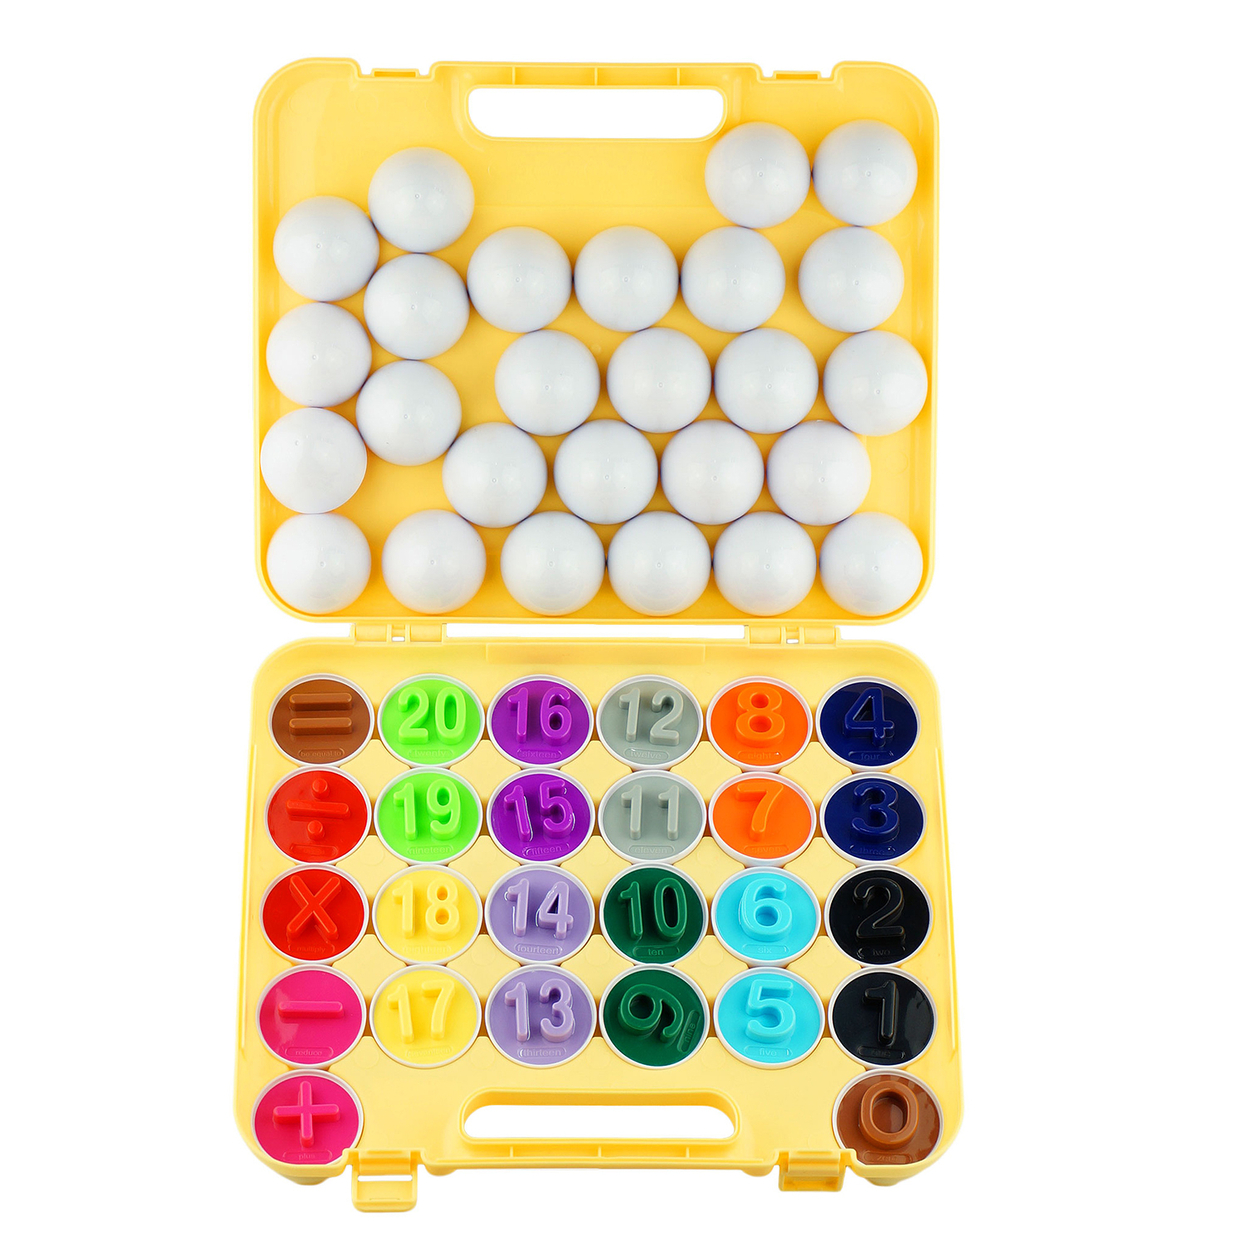 Dimple Fun Egg Matching Toy Set Of 2 (Total 52 Eggs) Toddler STEM Easter Eggs Toys Includes Numbers W/ Arithmetic & ABC Letters Recognition